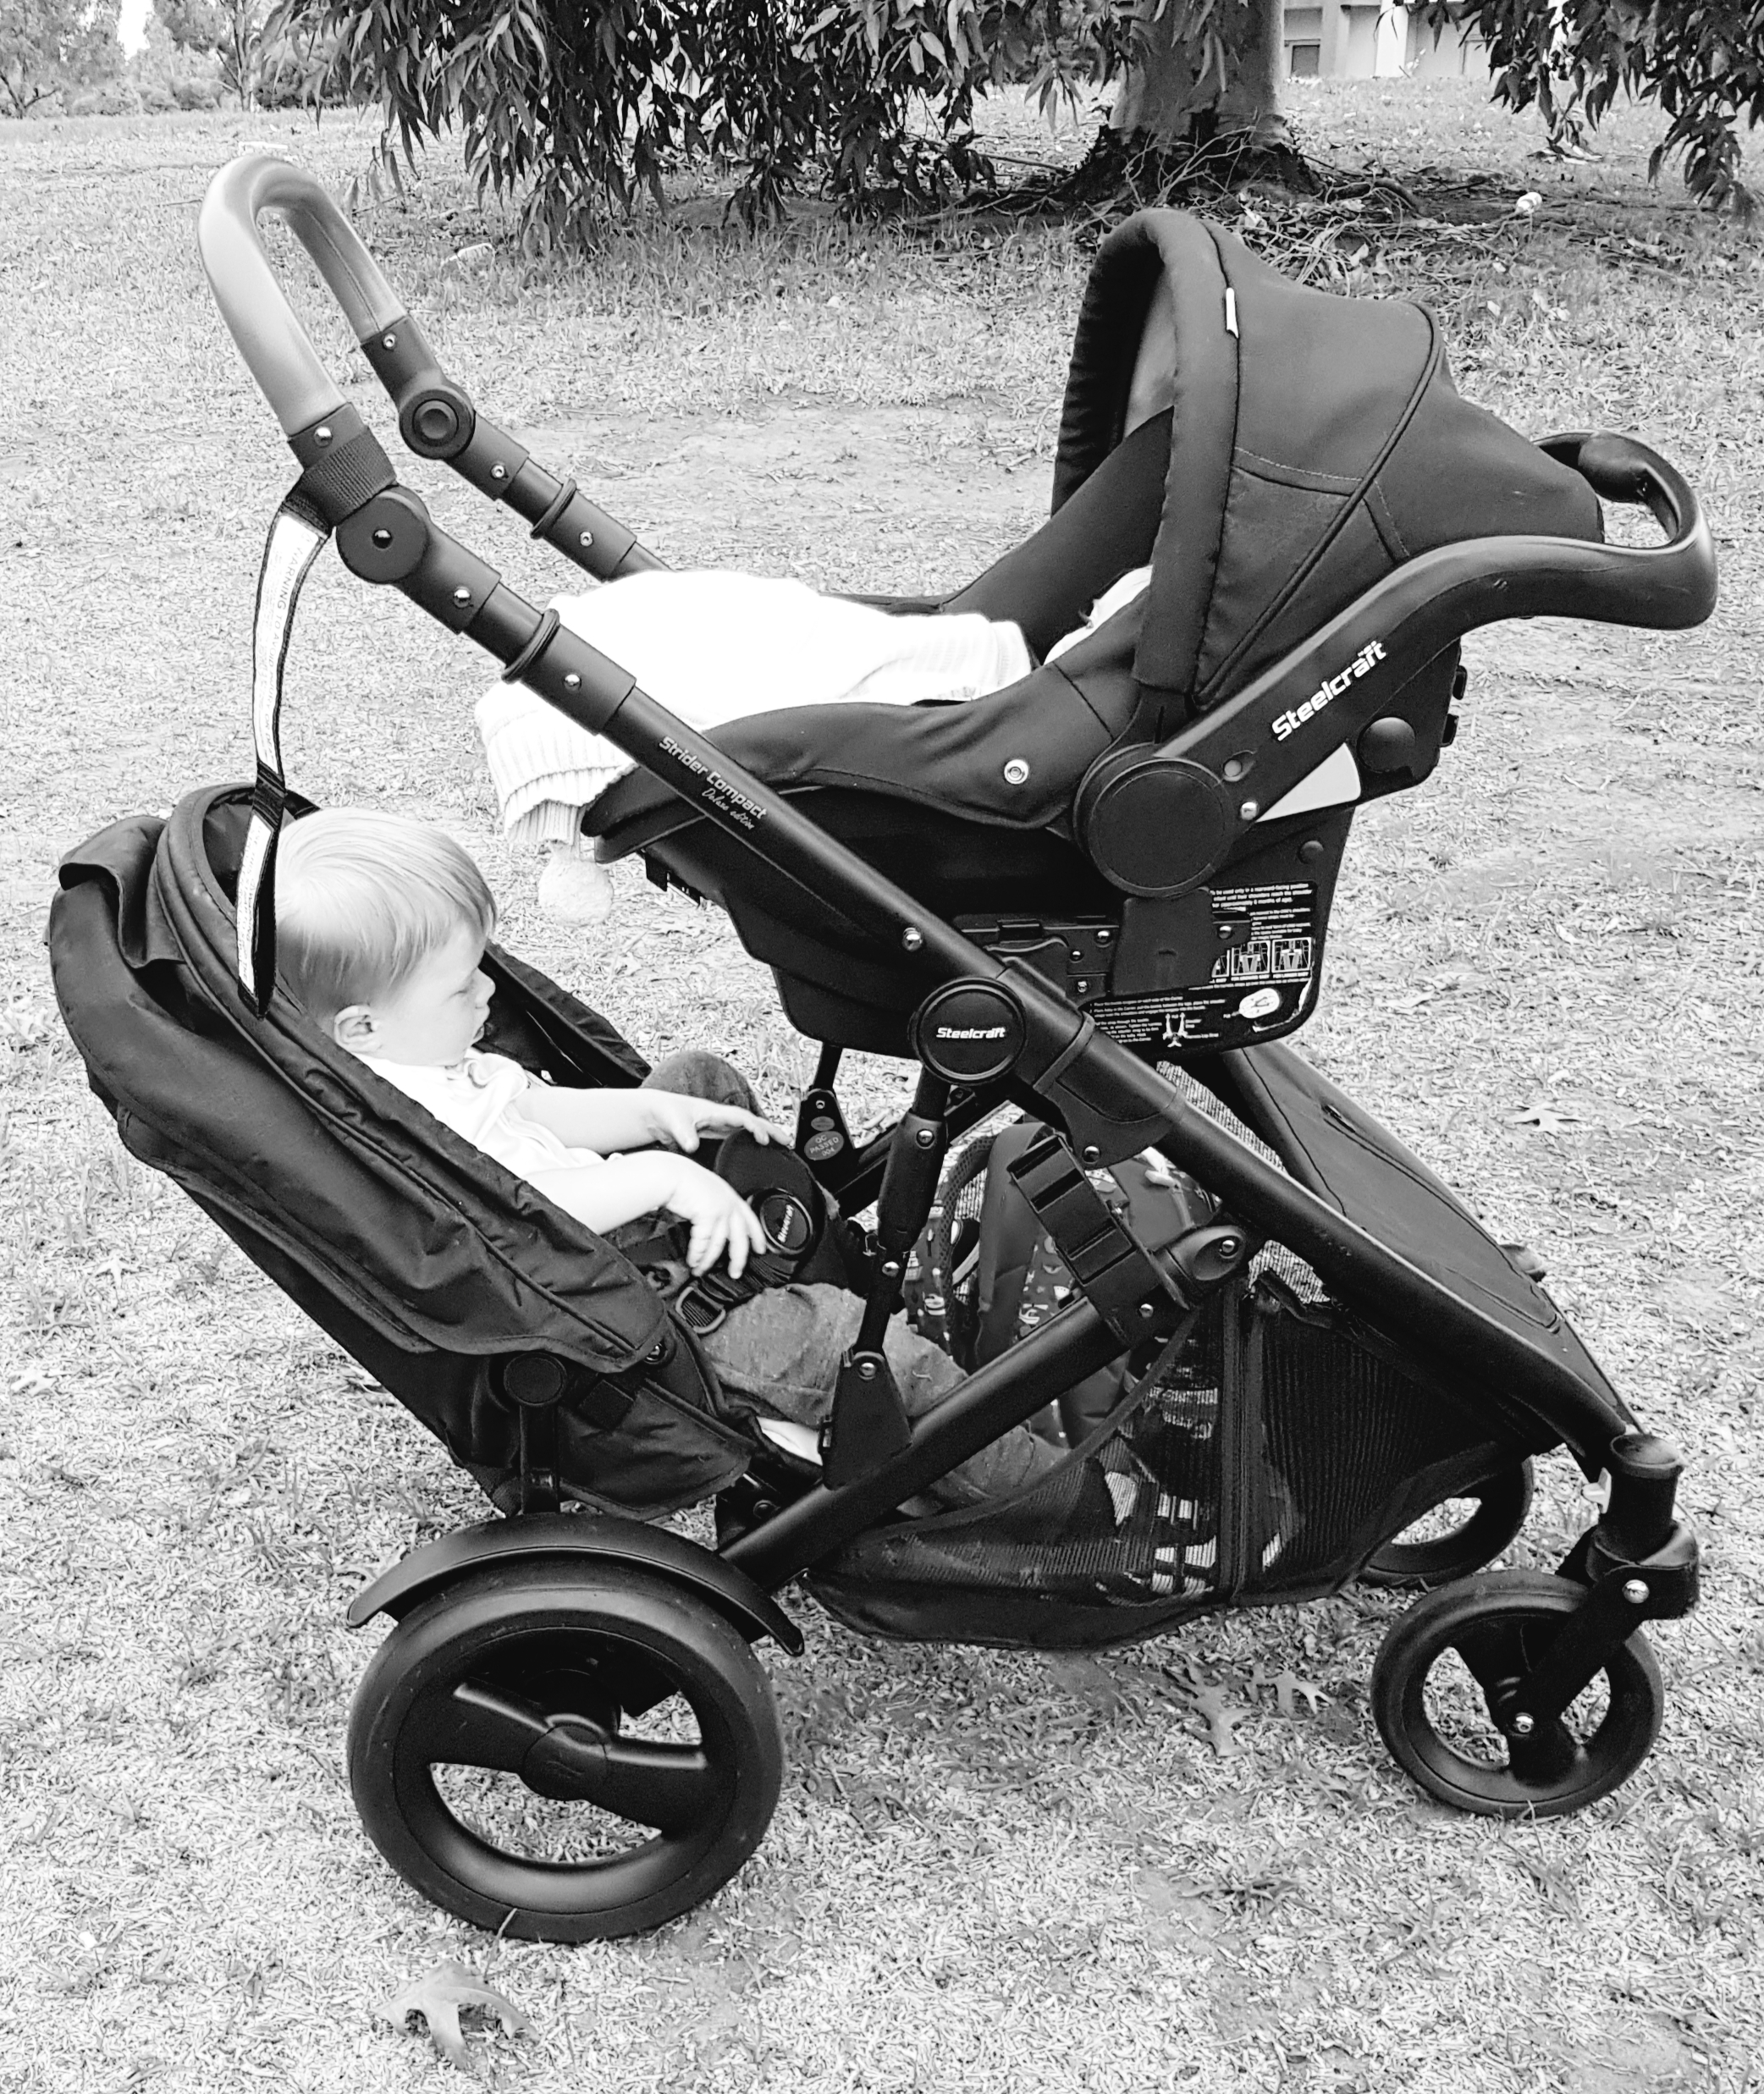 steelcraft compact stroller